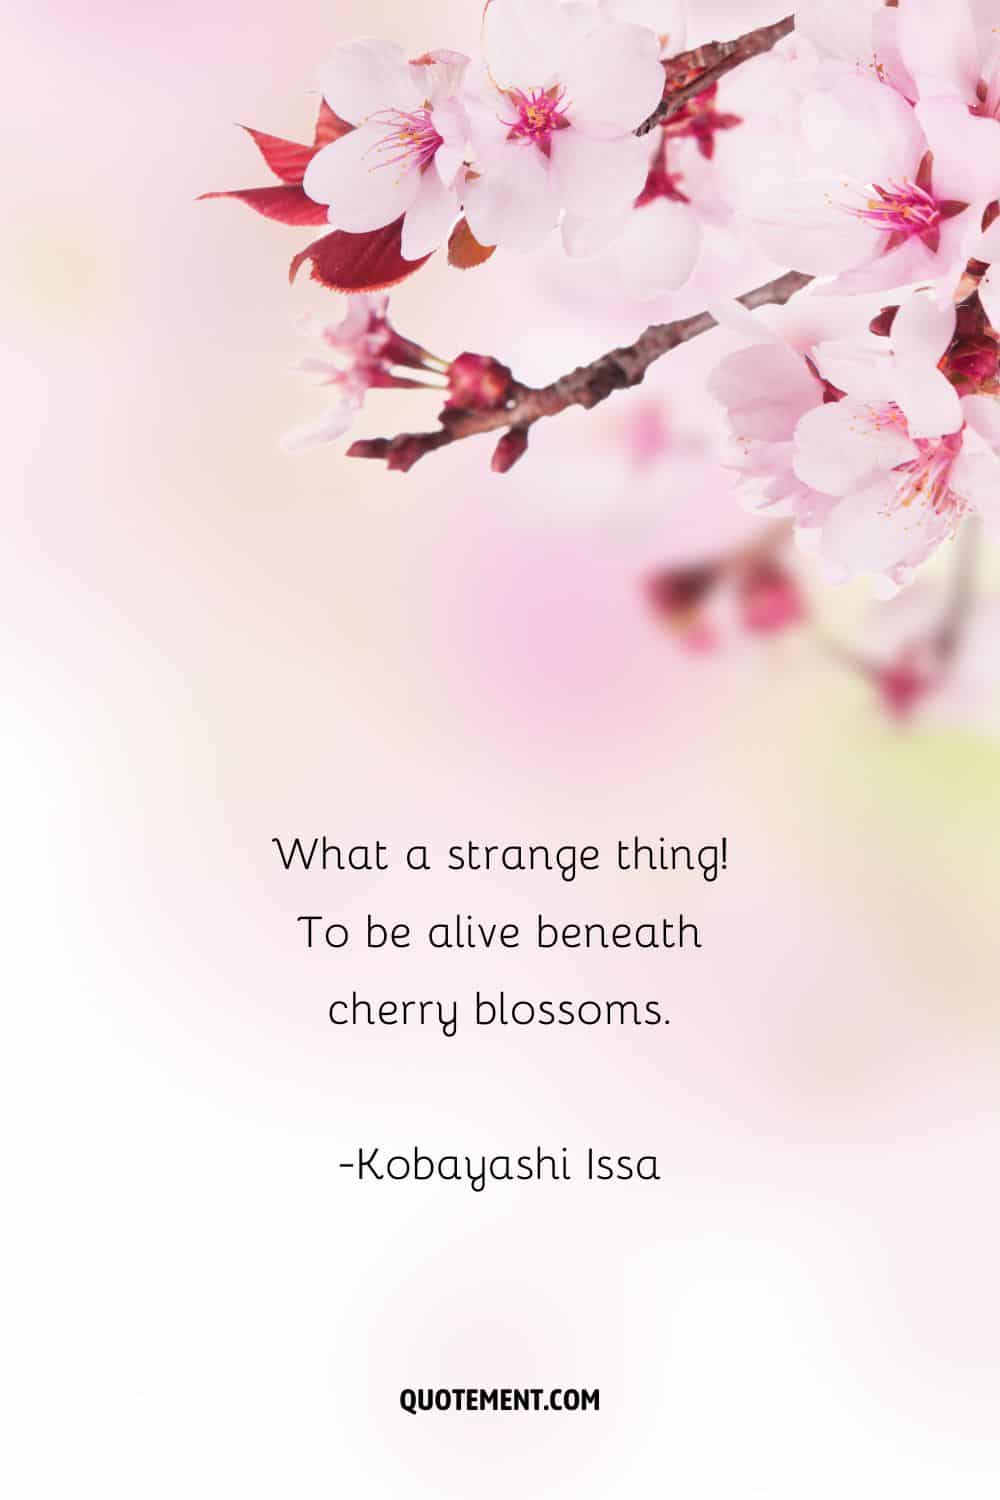 What a strange thing! To be alive beneath cherry blossoms.